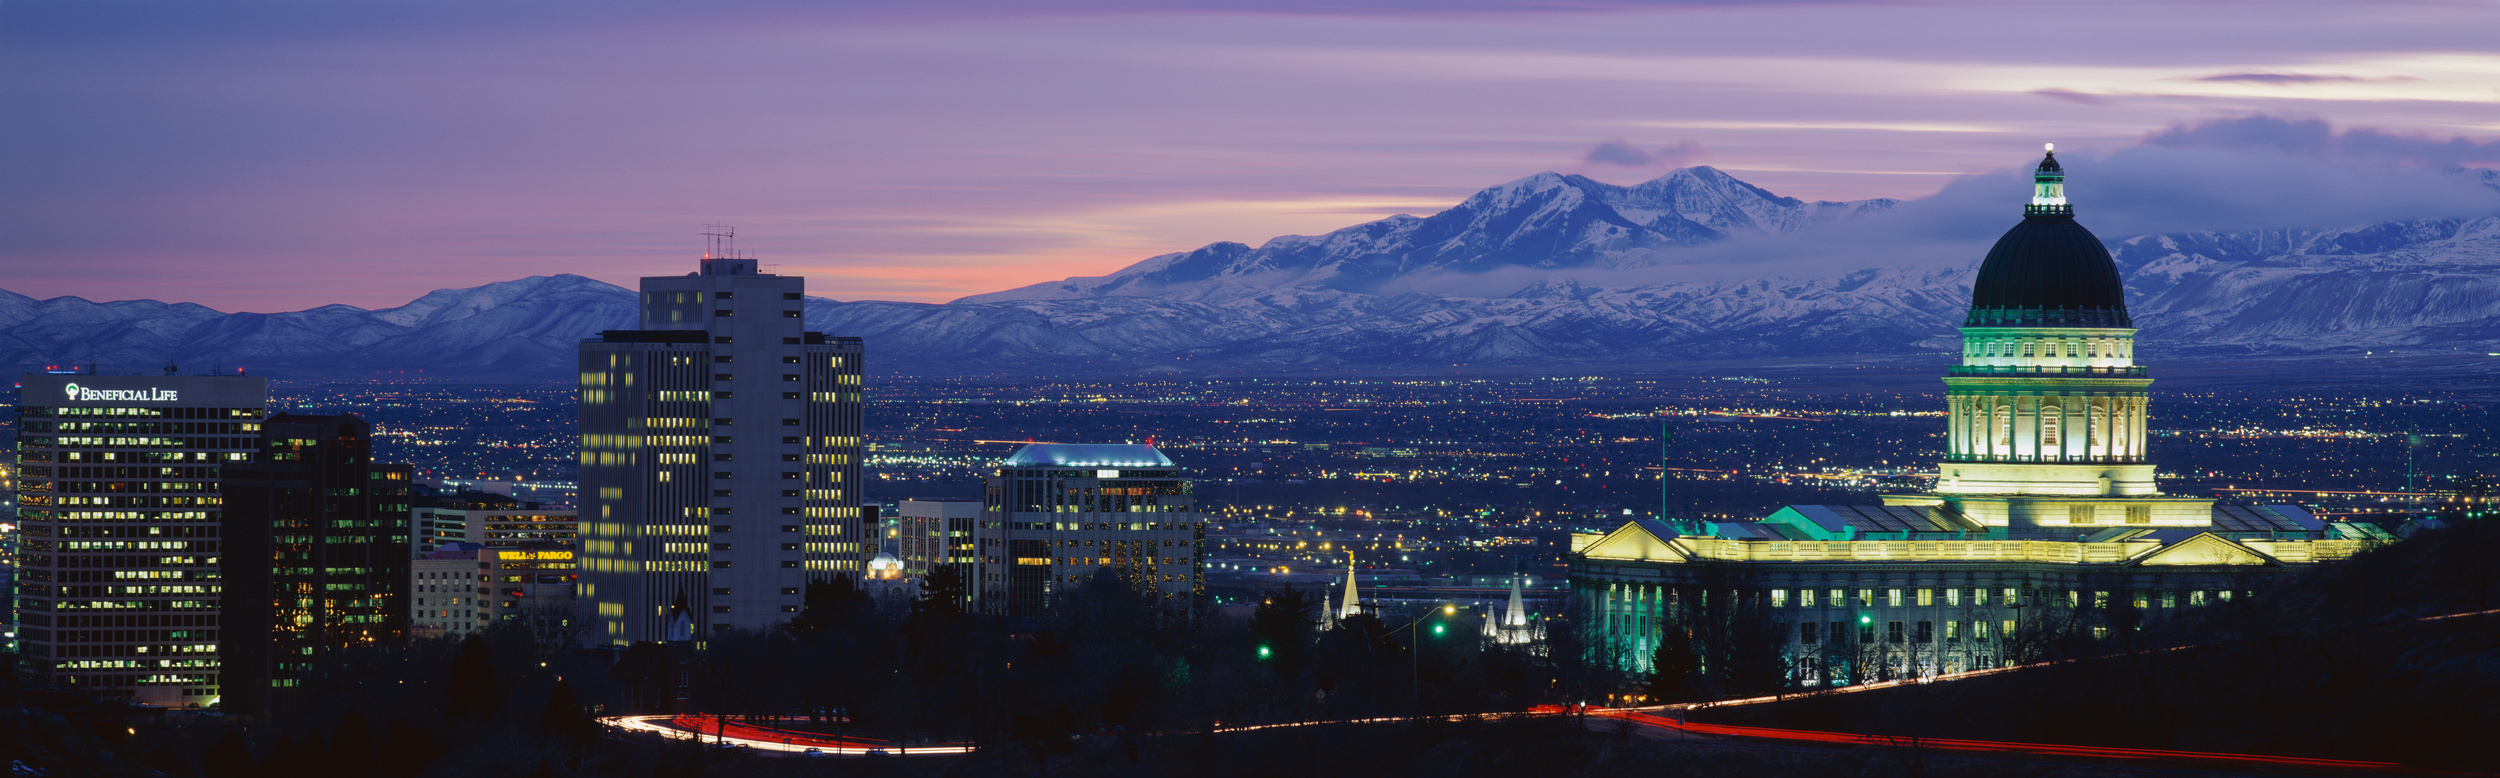 <p>Many have written off Salt Lake City as the home of the ultra-conservative, but as it grows, so does its diversity and nightlife. Yes, you can drink liquor in Salt Lake City, and there are plenty of bars and clubs where you can do so. </p><p>You may also like: <a href='https://www.yardbarker.com/lifestyle/articles/20_healthy_slow_cooker_recipes_032524/s1__36842327'>20 healthy slow cooker recipes</a></p>